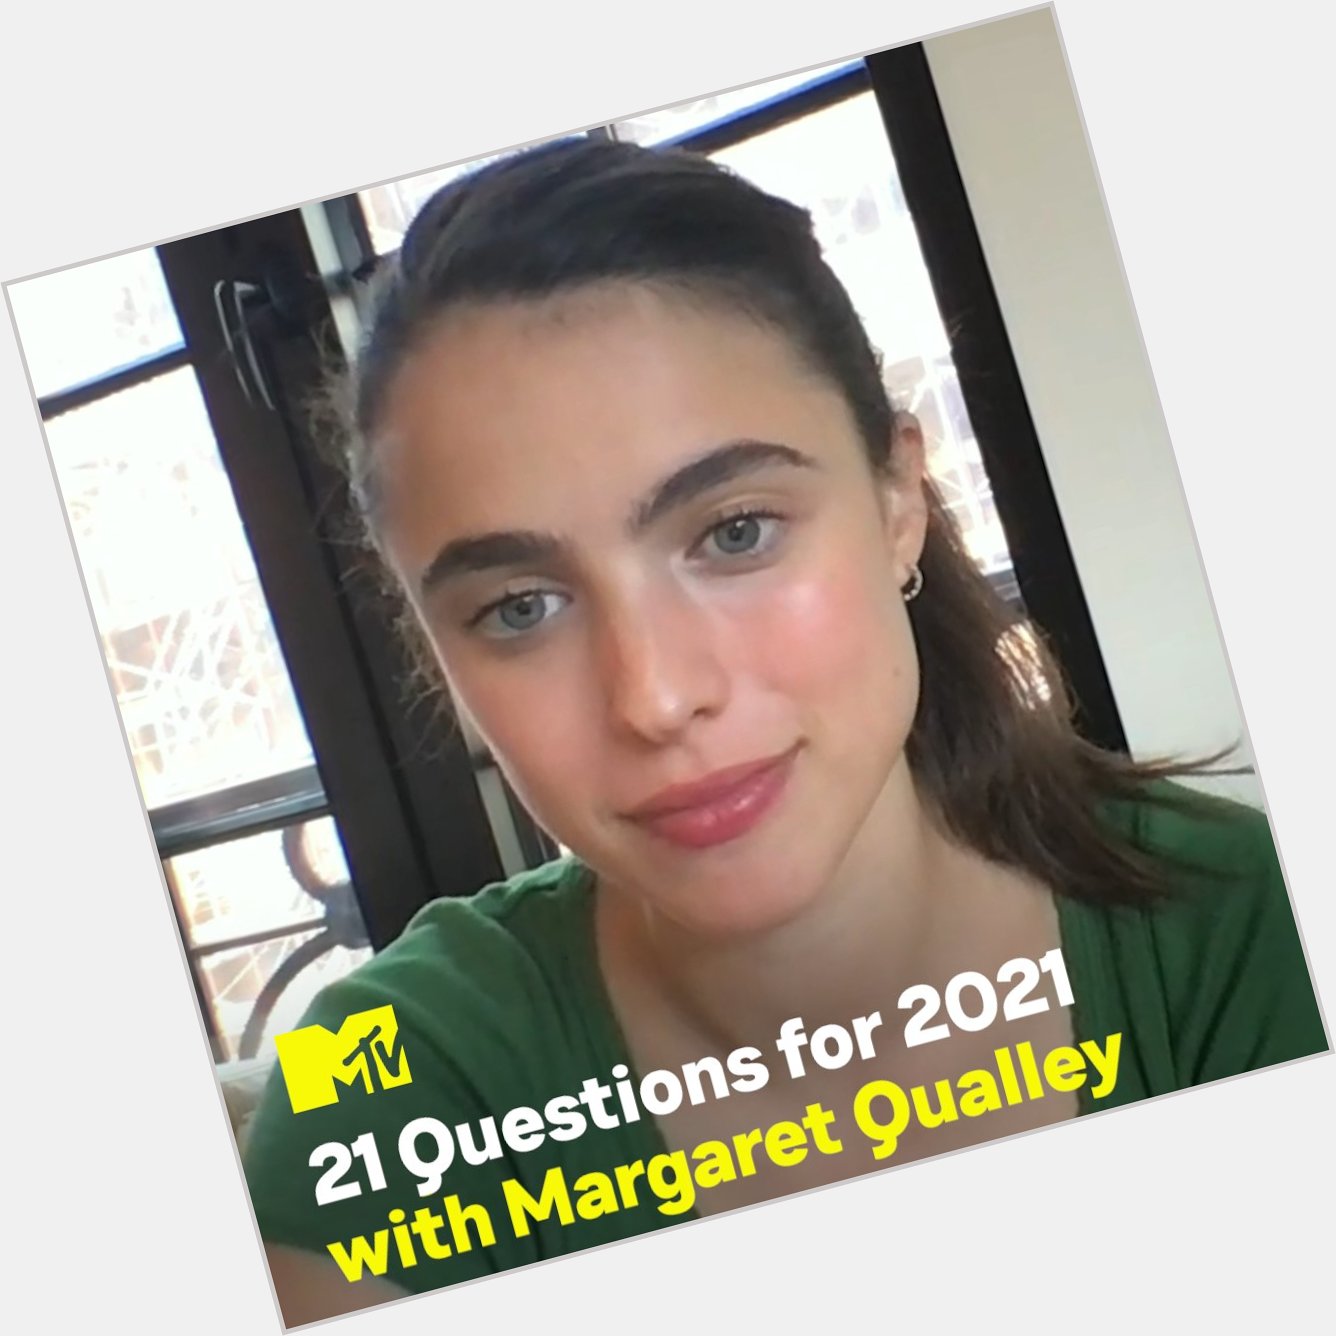 Happy birthday, Margaret Qualley! I hope you get to celebrate today with a pickles & peanut butter sandwich.  